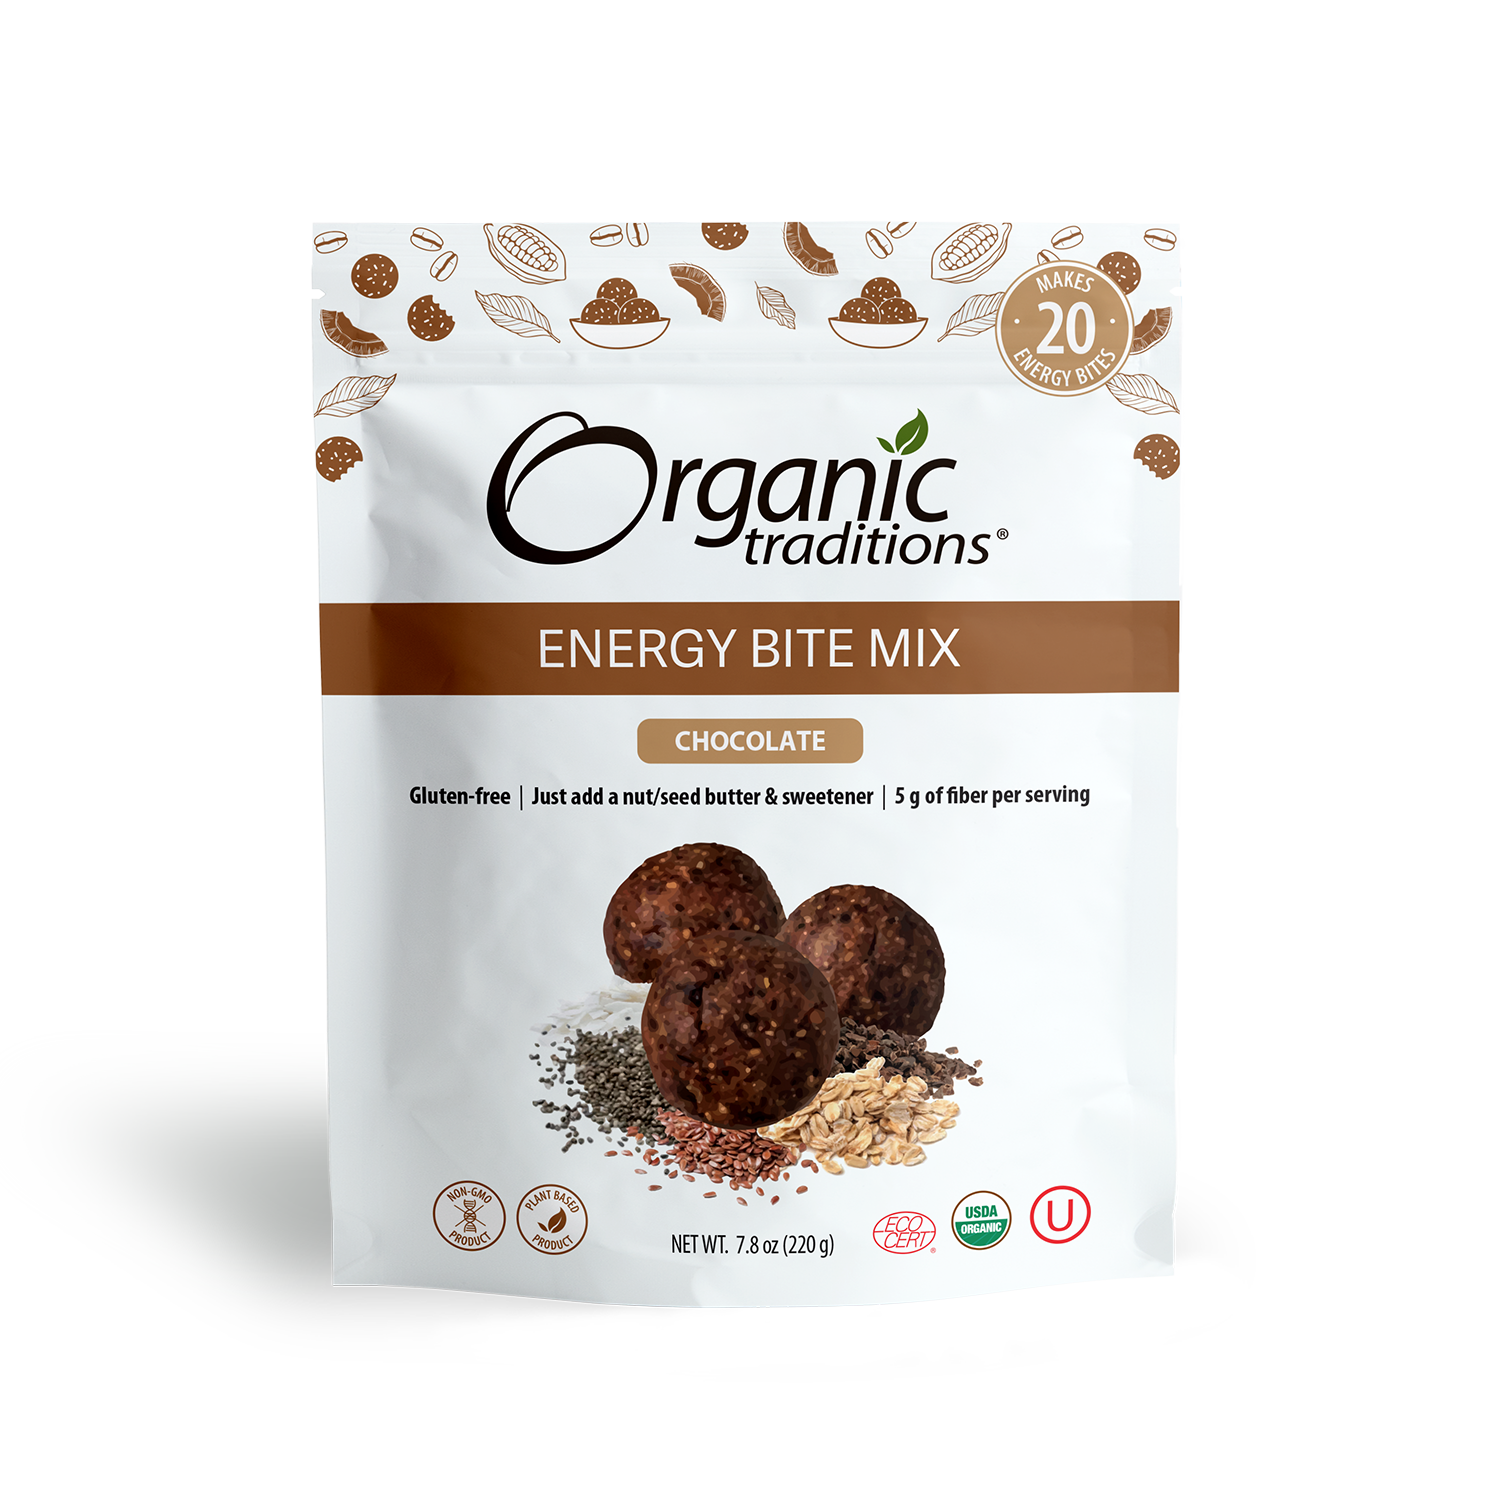 organic traditions chocolate energy bite mix front of bag image